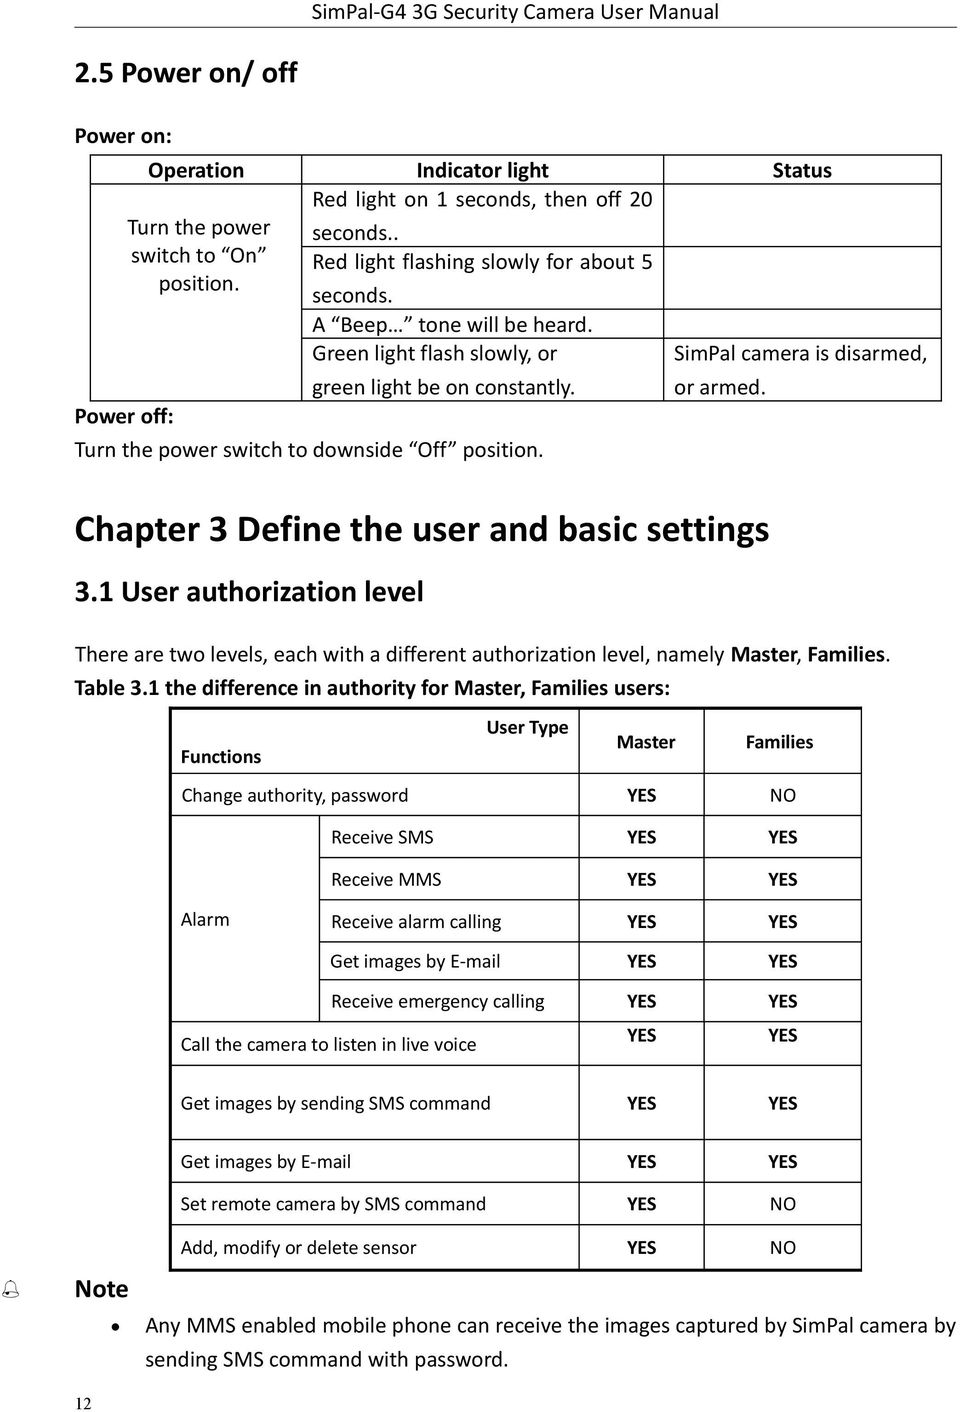 Chapter 3 Define the user and basic settings 3.1 User authorization level There are two levels, each with a different authorization level, namely Master, Families. Table 3.